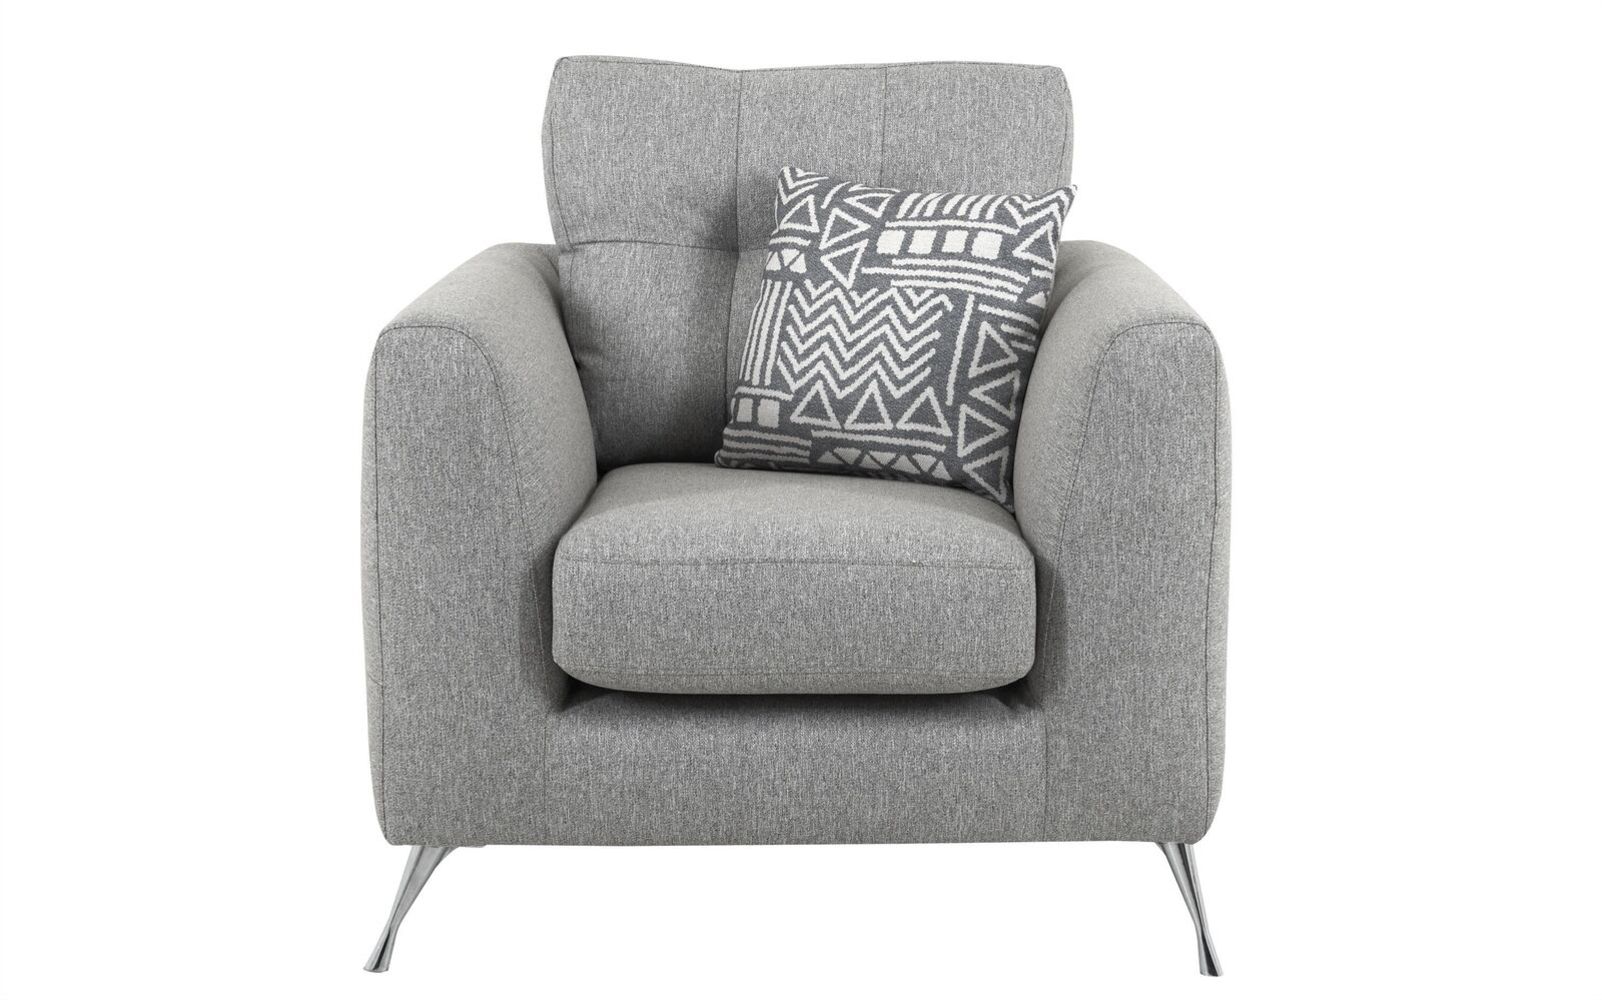 Sofas and Chairs from SCS, Swoon, Stressless and more with 15% buyers premium